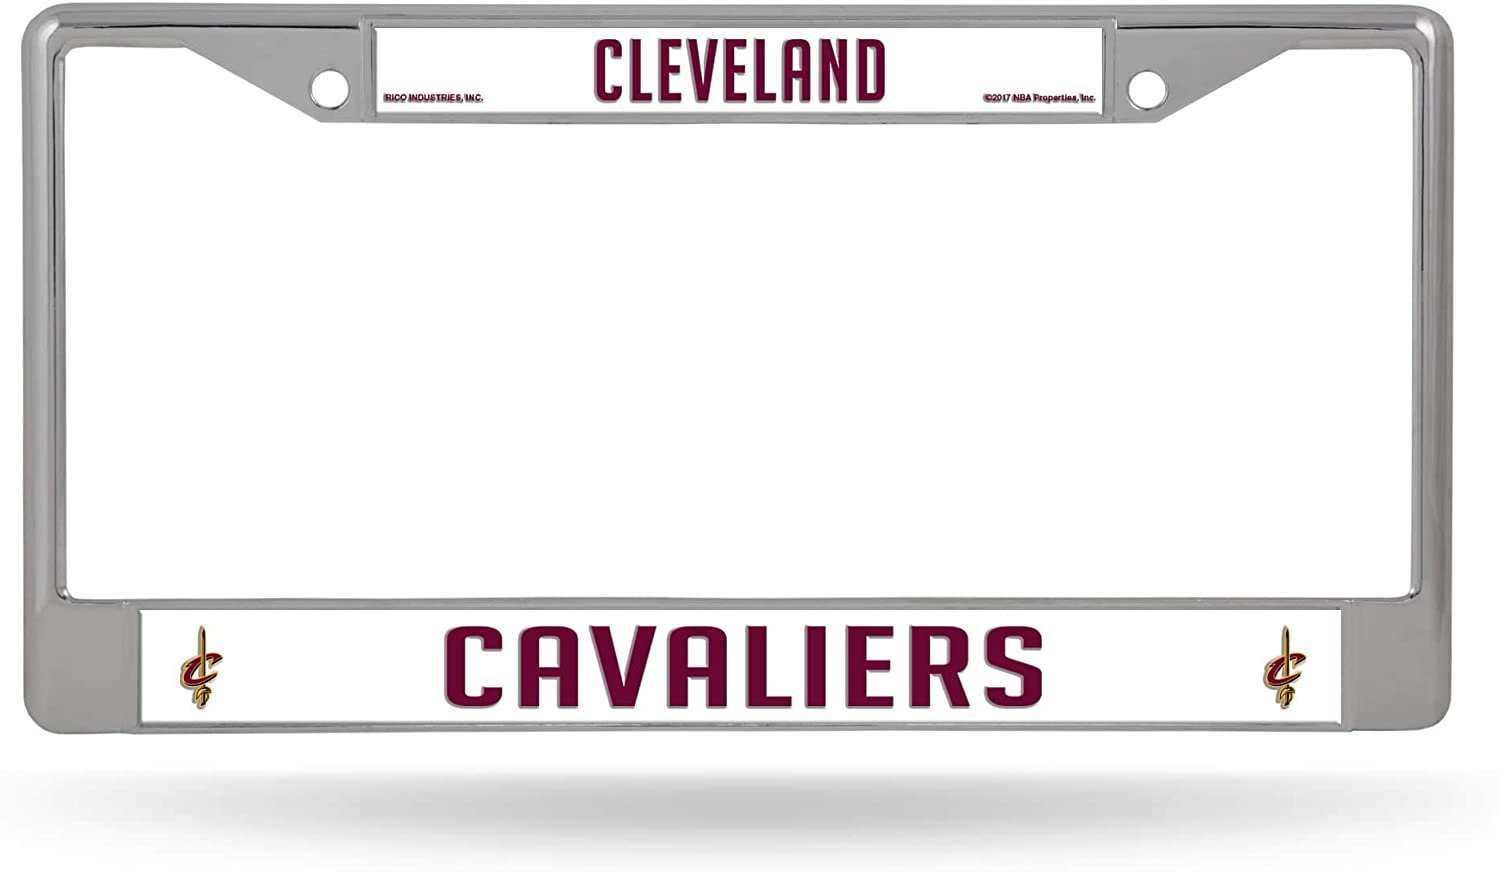 Cleveland Cavaliers Premium Metal License Plate Frame Chrome Tag Cover, 12x6 Inch